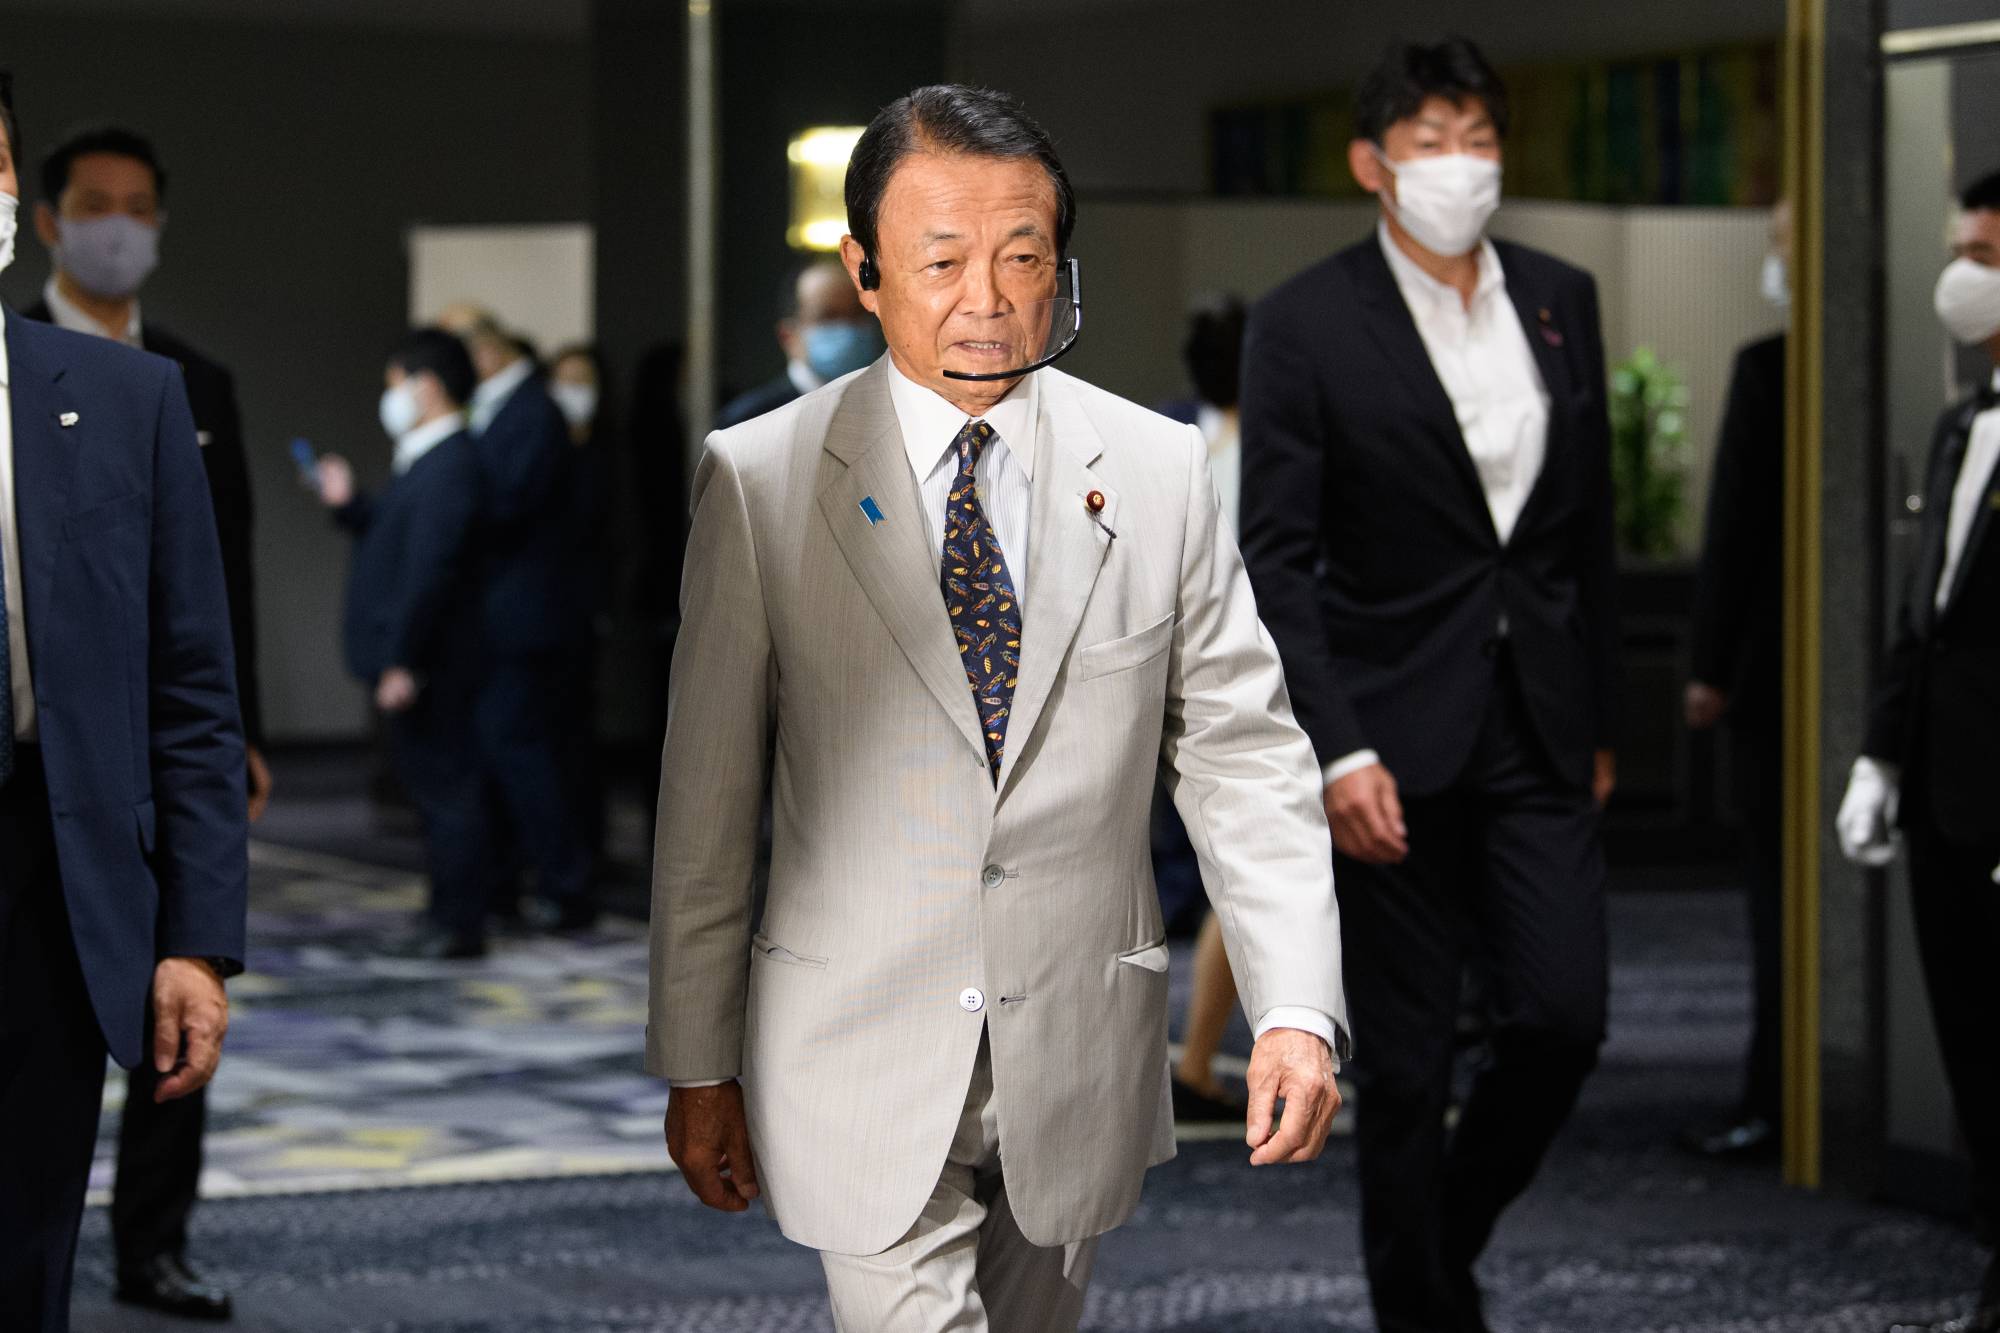 Deputy Prime Minister Taro Aso arrives for a ceremony marking the beginning of Chief Cabinet Secretary Yoshihide Suga's campaign for the Liberal Democratic Party leadership race in Tokyo on Tuesday. | BLOOMBERG